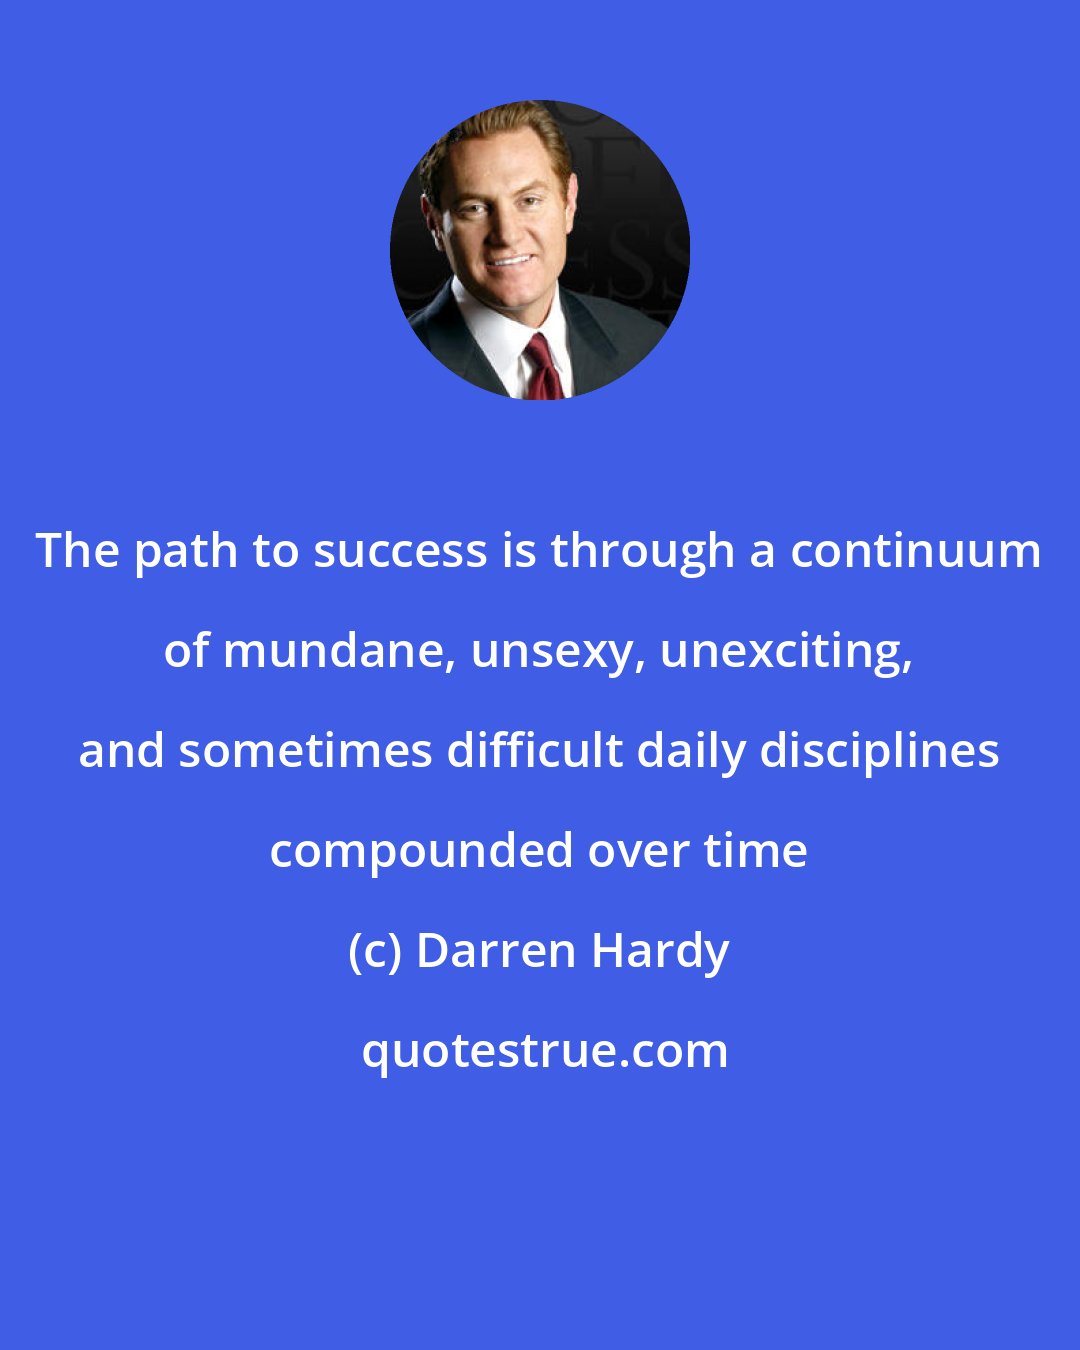 Darren Hardy: The path to success is through a continuum of mundane, unsexy, unexciting, and sometimes difficult daily disciplines compounded over time